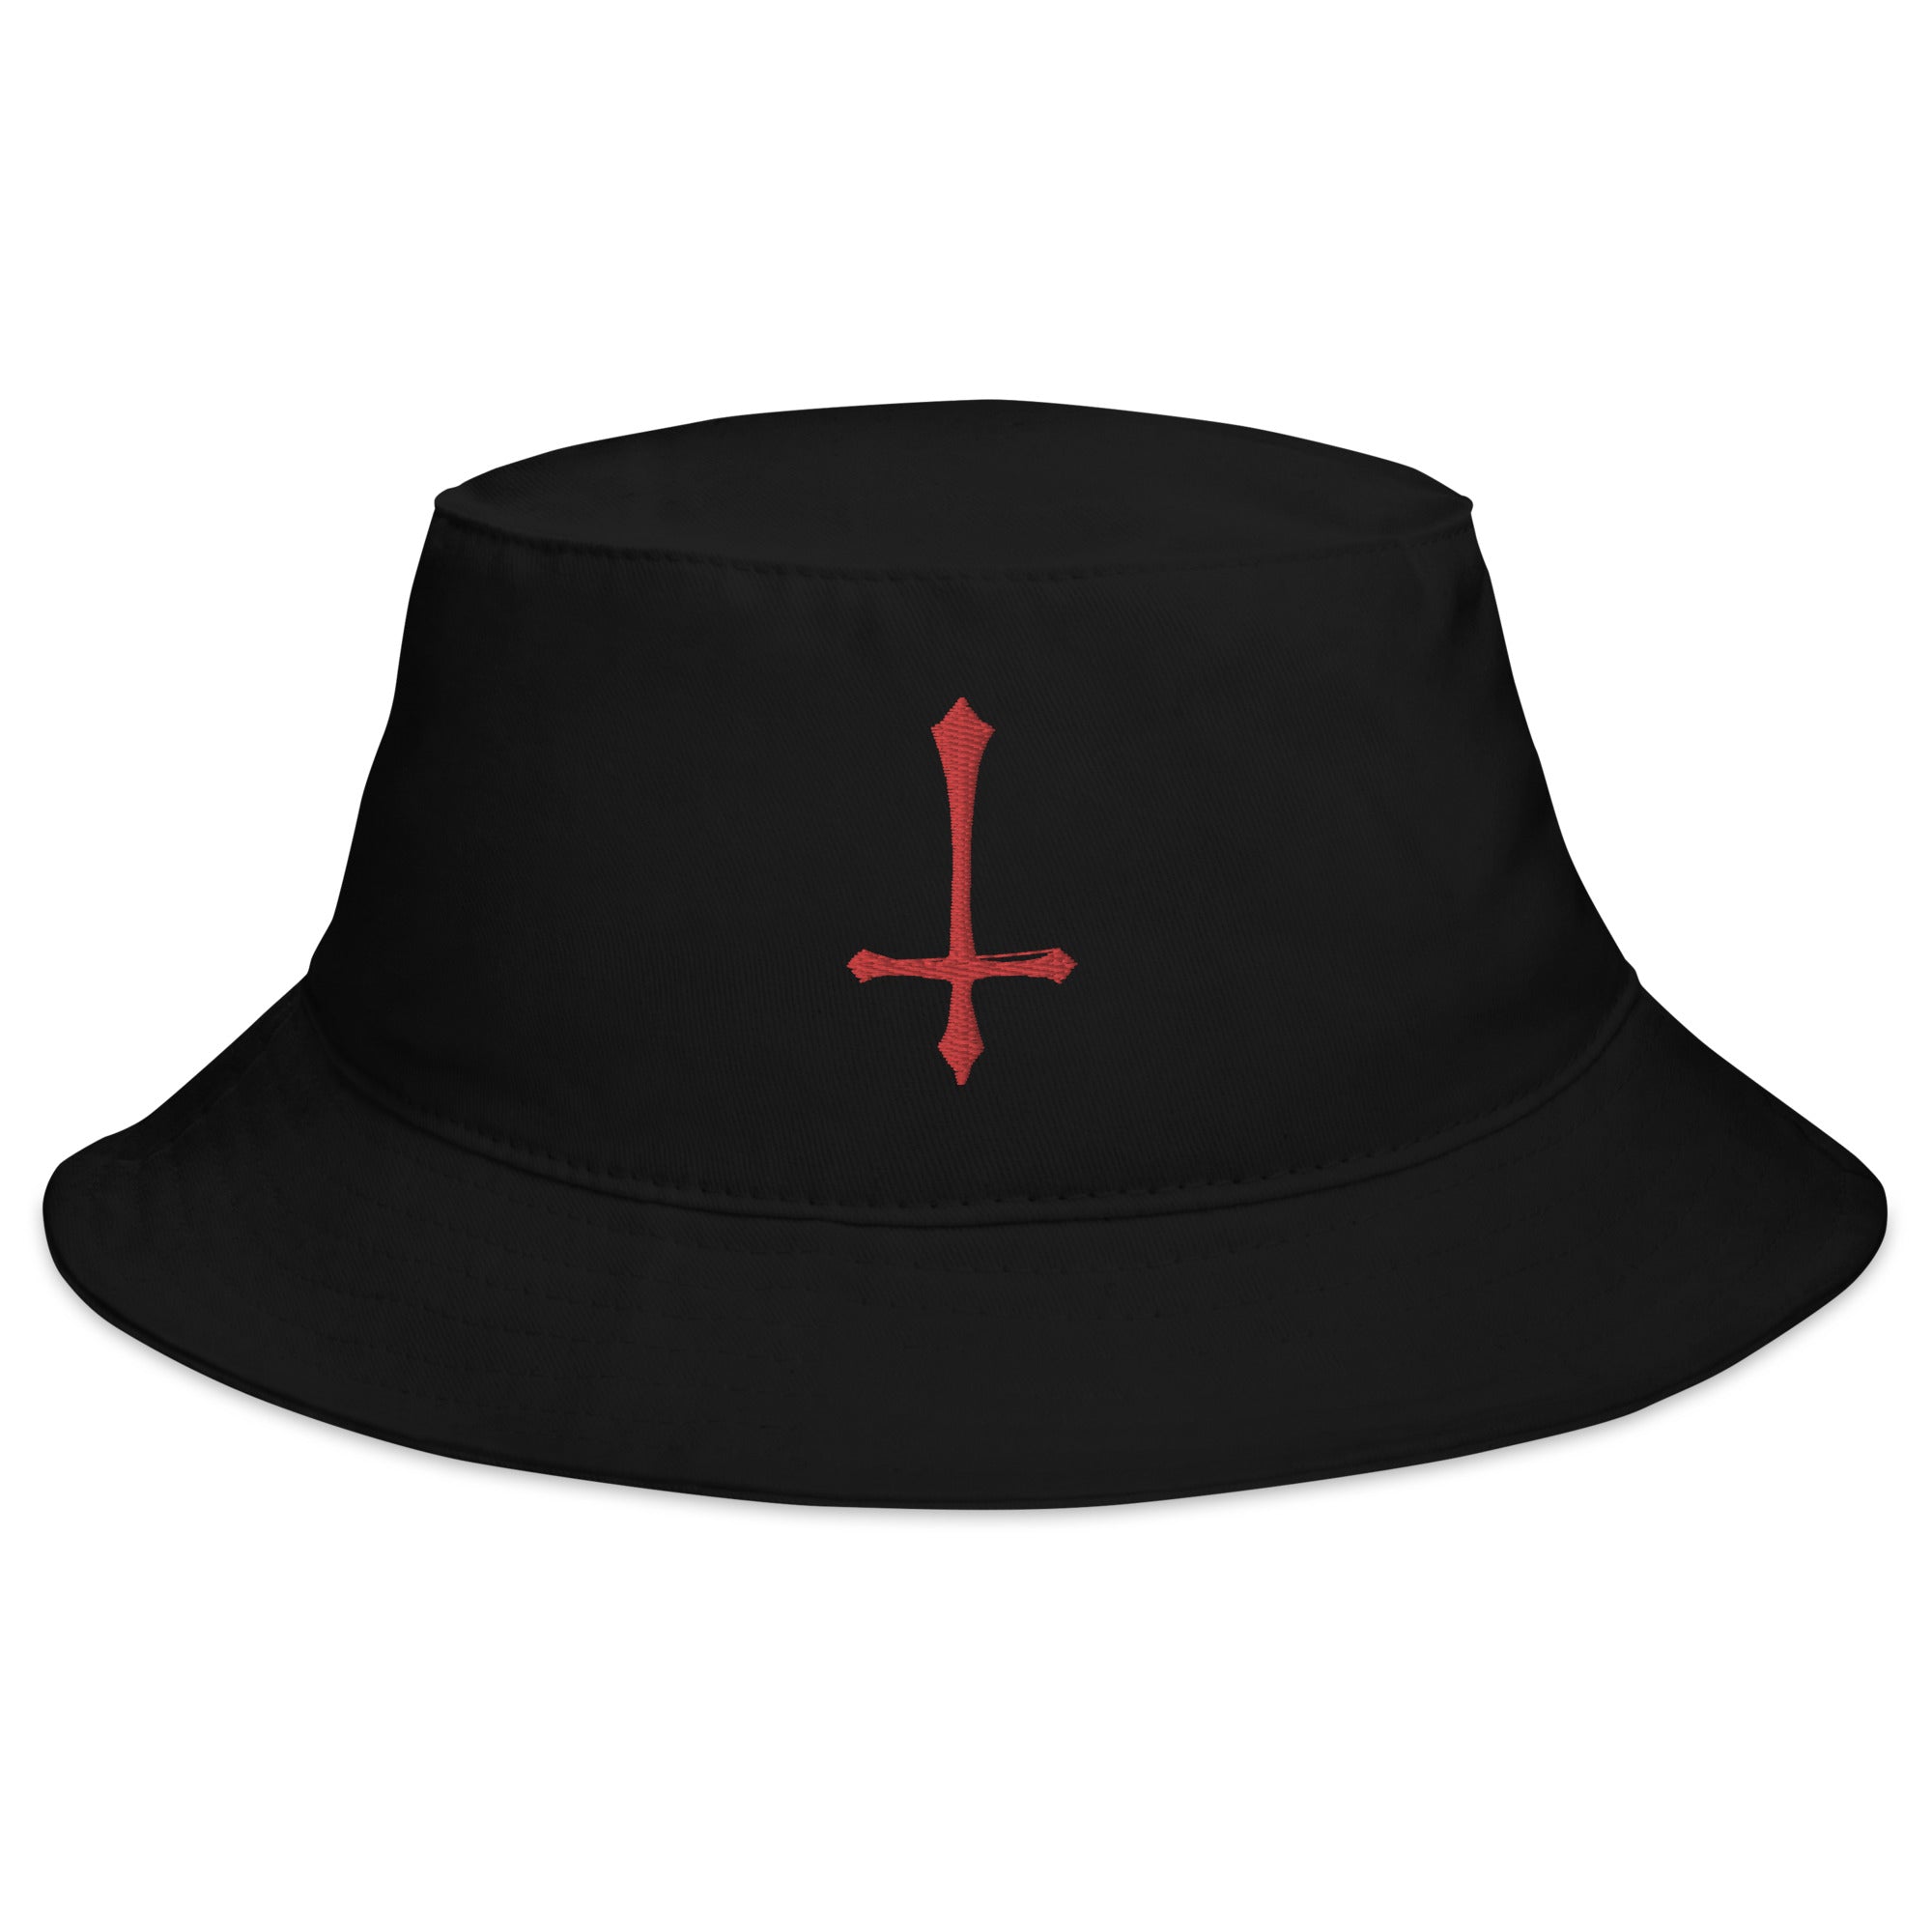 Red Inverted Cross Embroidered Bucket Hat Gothic Medeival Fashion